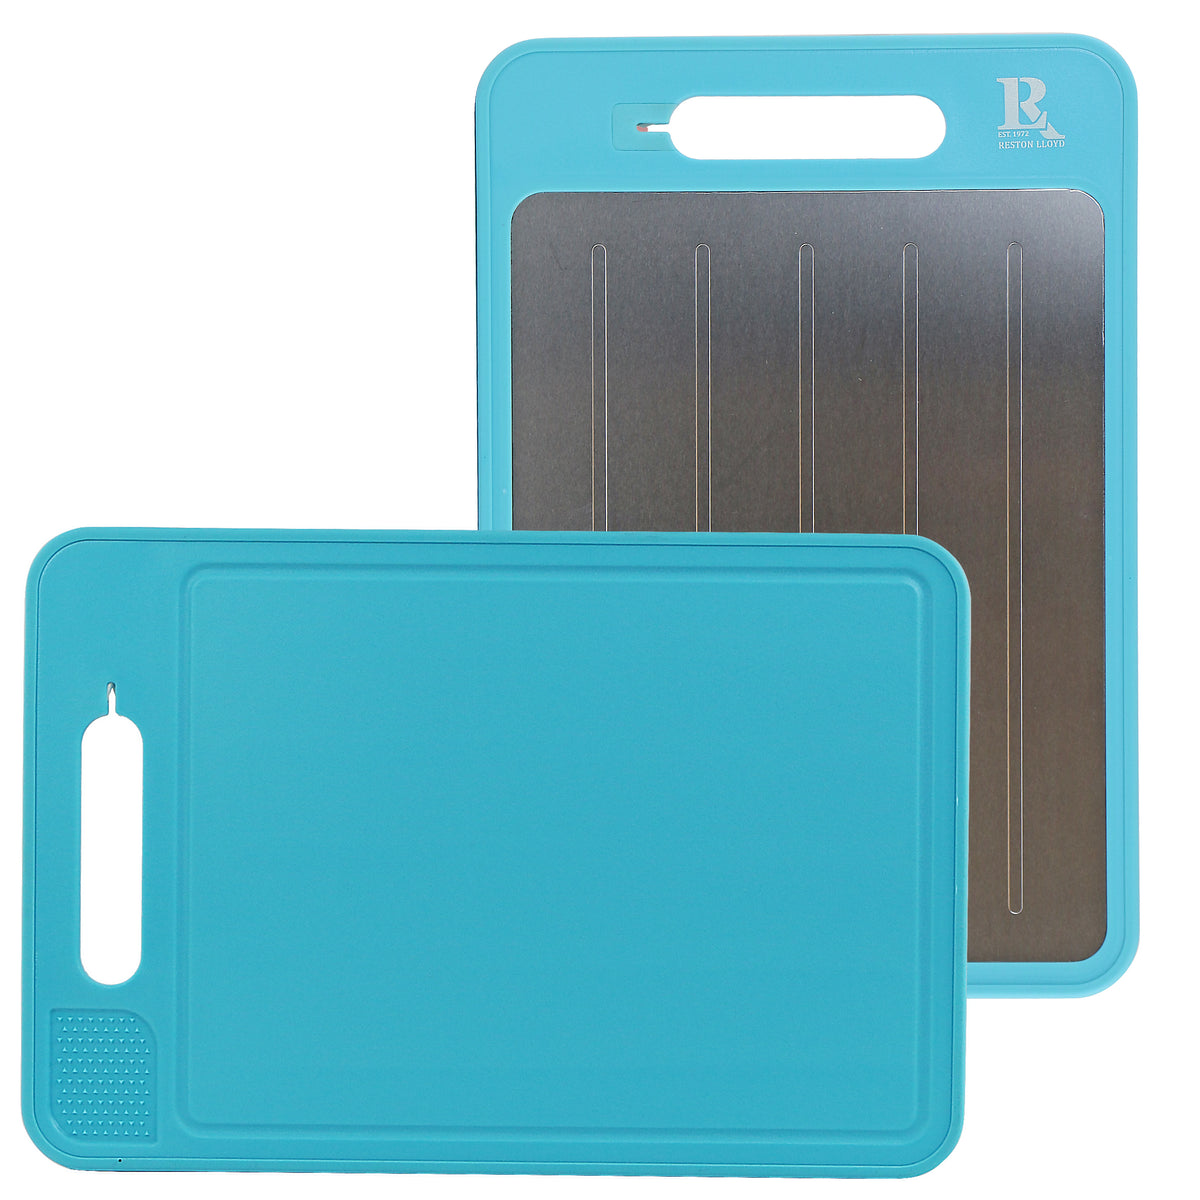 Cutting Board/Defroster, & More, Turquoise – Reston Lloyd